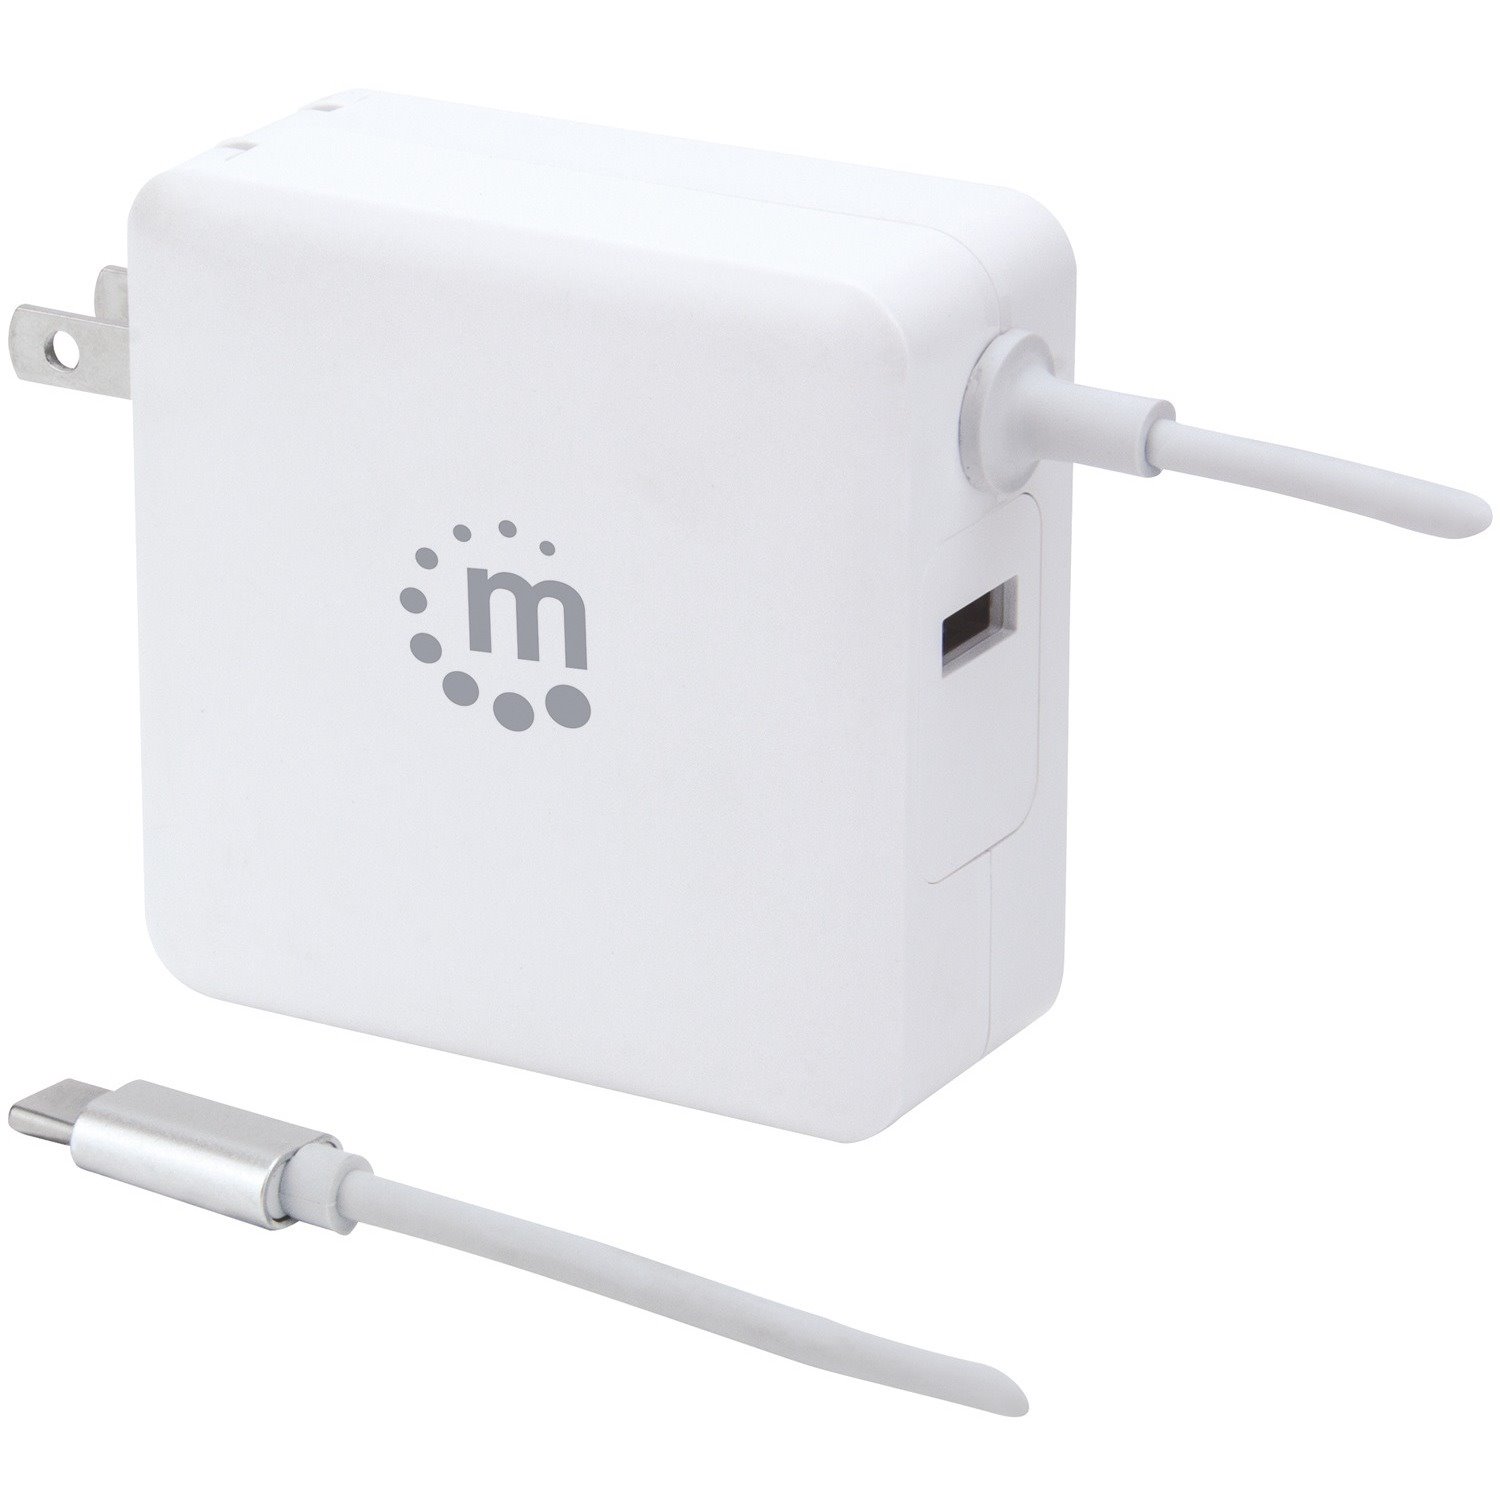 Manhattan Wall/Power Charger (Euro 2-pin), USB-C and USB-A ports, USB-C Output: 60W / 3A, USB-A Output: 2.4A, USB-C 1m Cable Built In, White, Three Year Warranty, Box